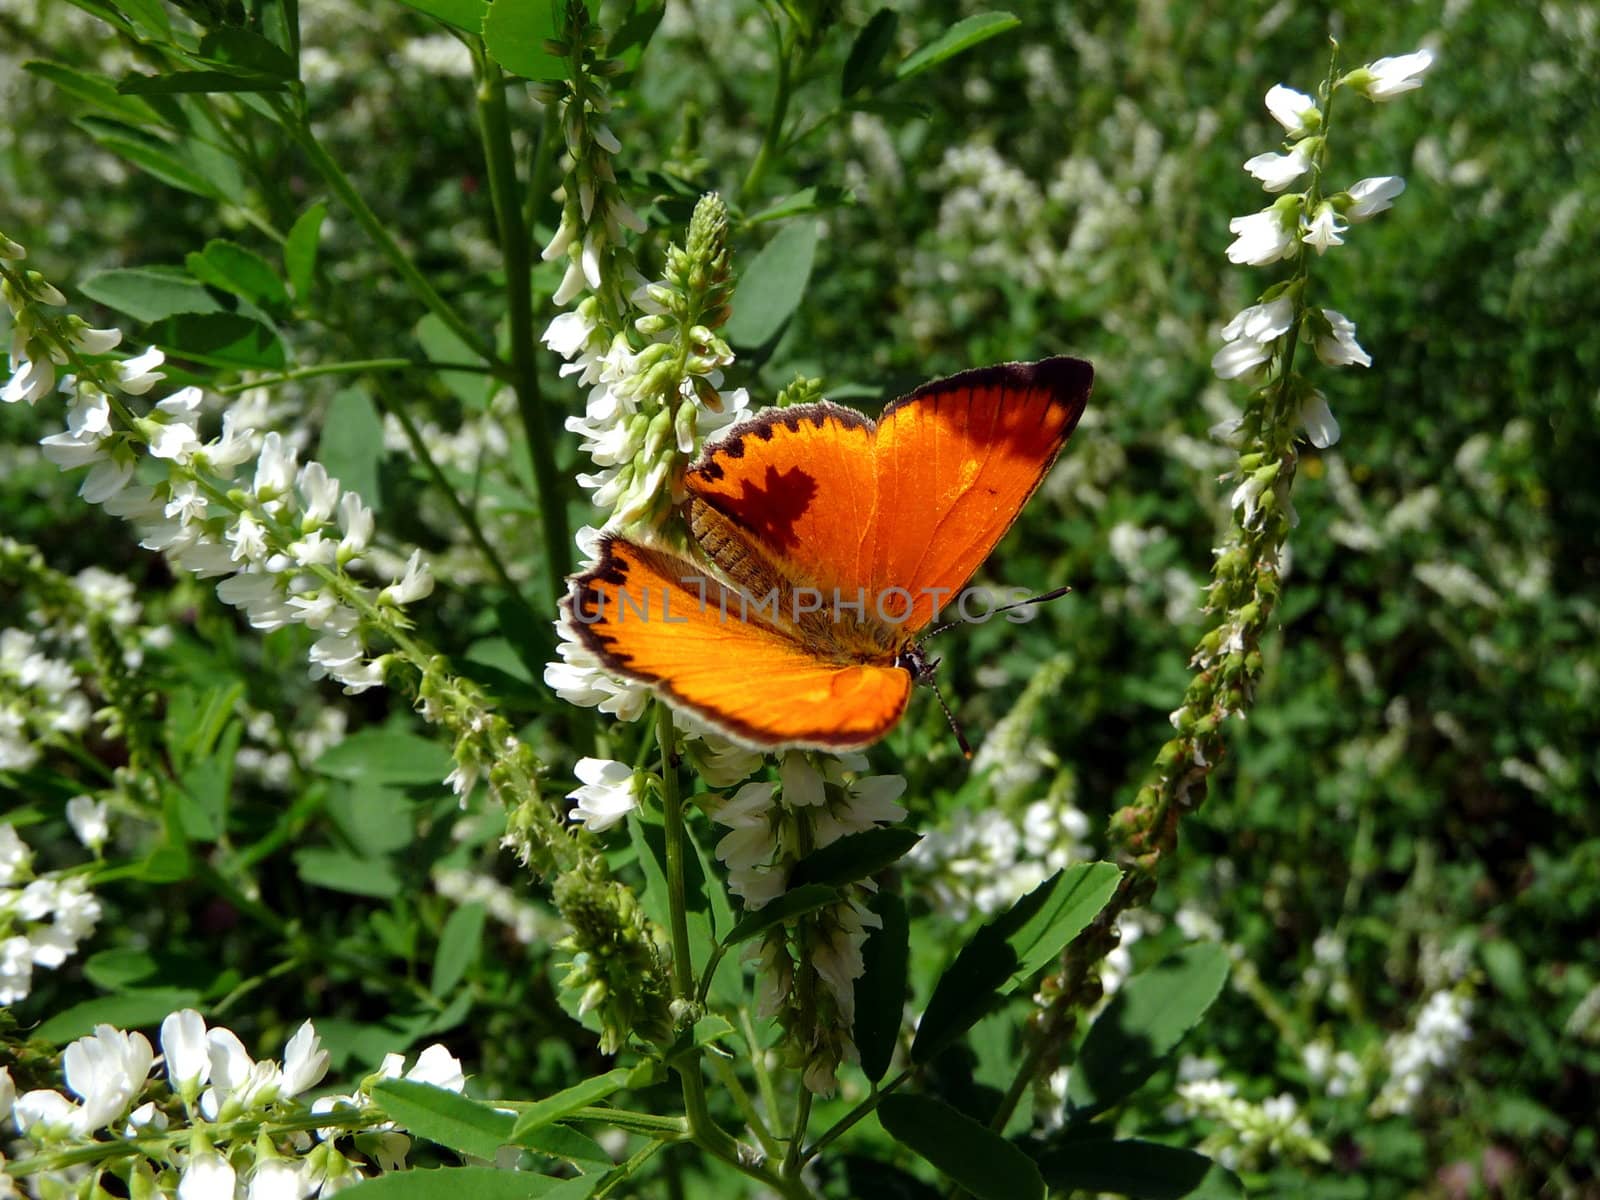 Small red butterfly sits on filed flowers